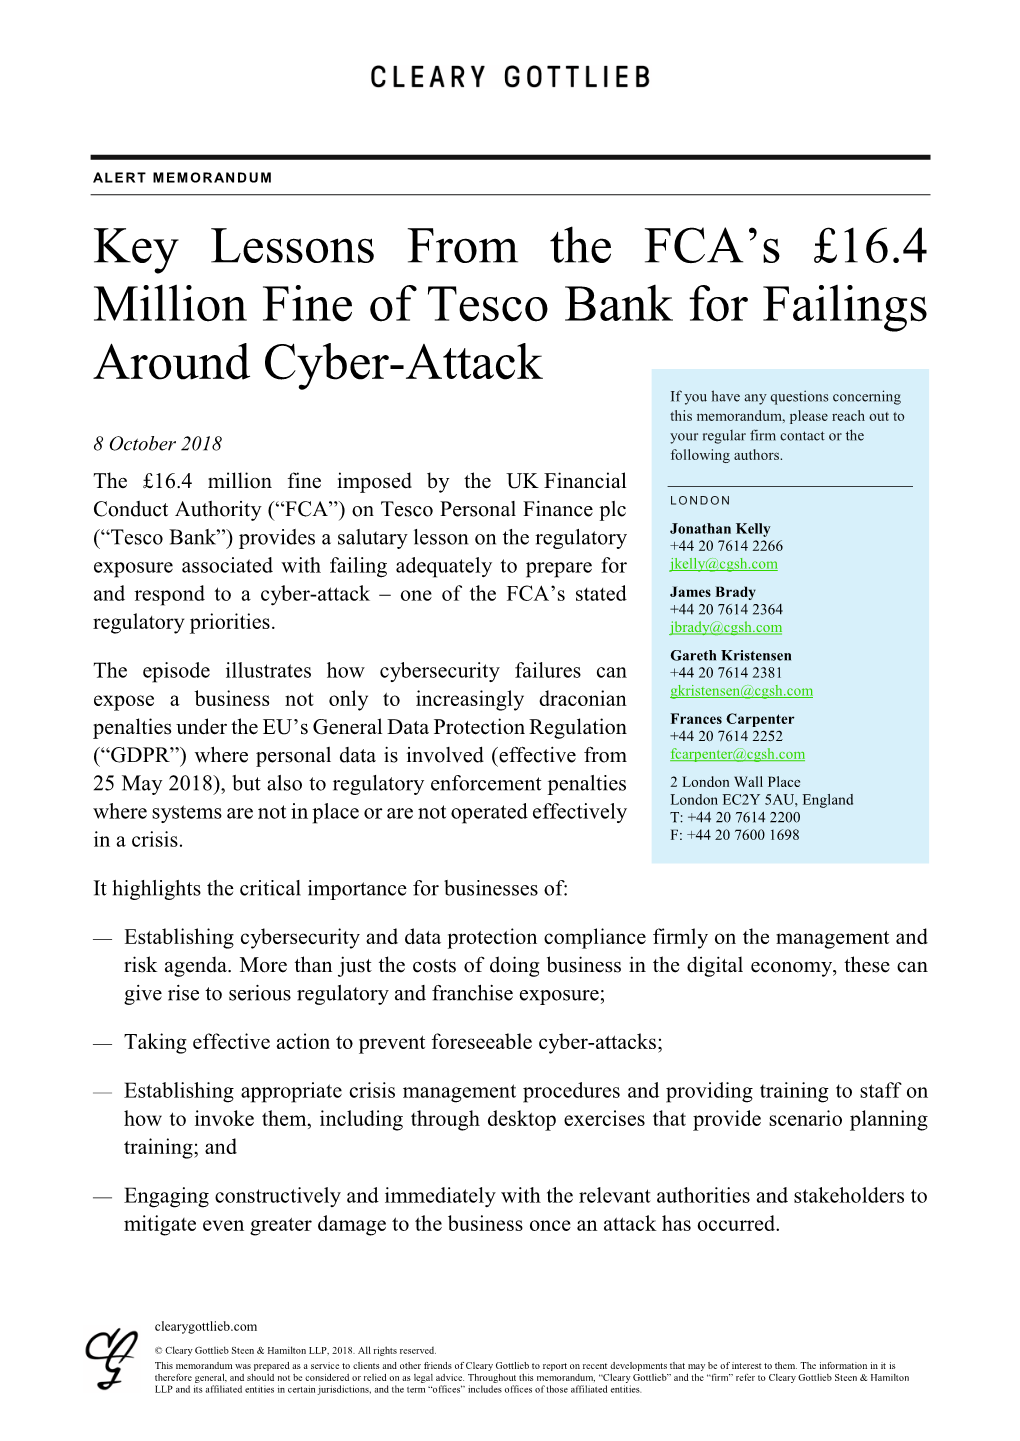 Key Lessons from the FCA's £16.4 Million Fine of Tesco Bank for Failings Around Cyber-Attack